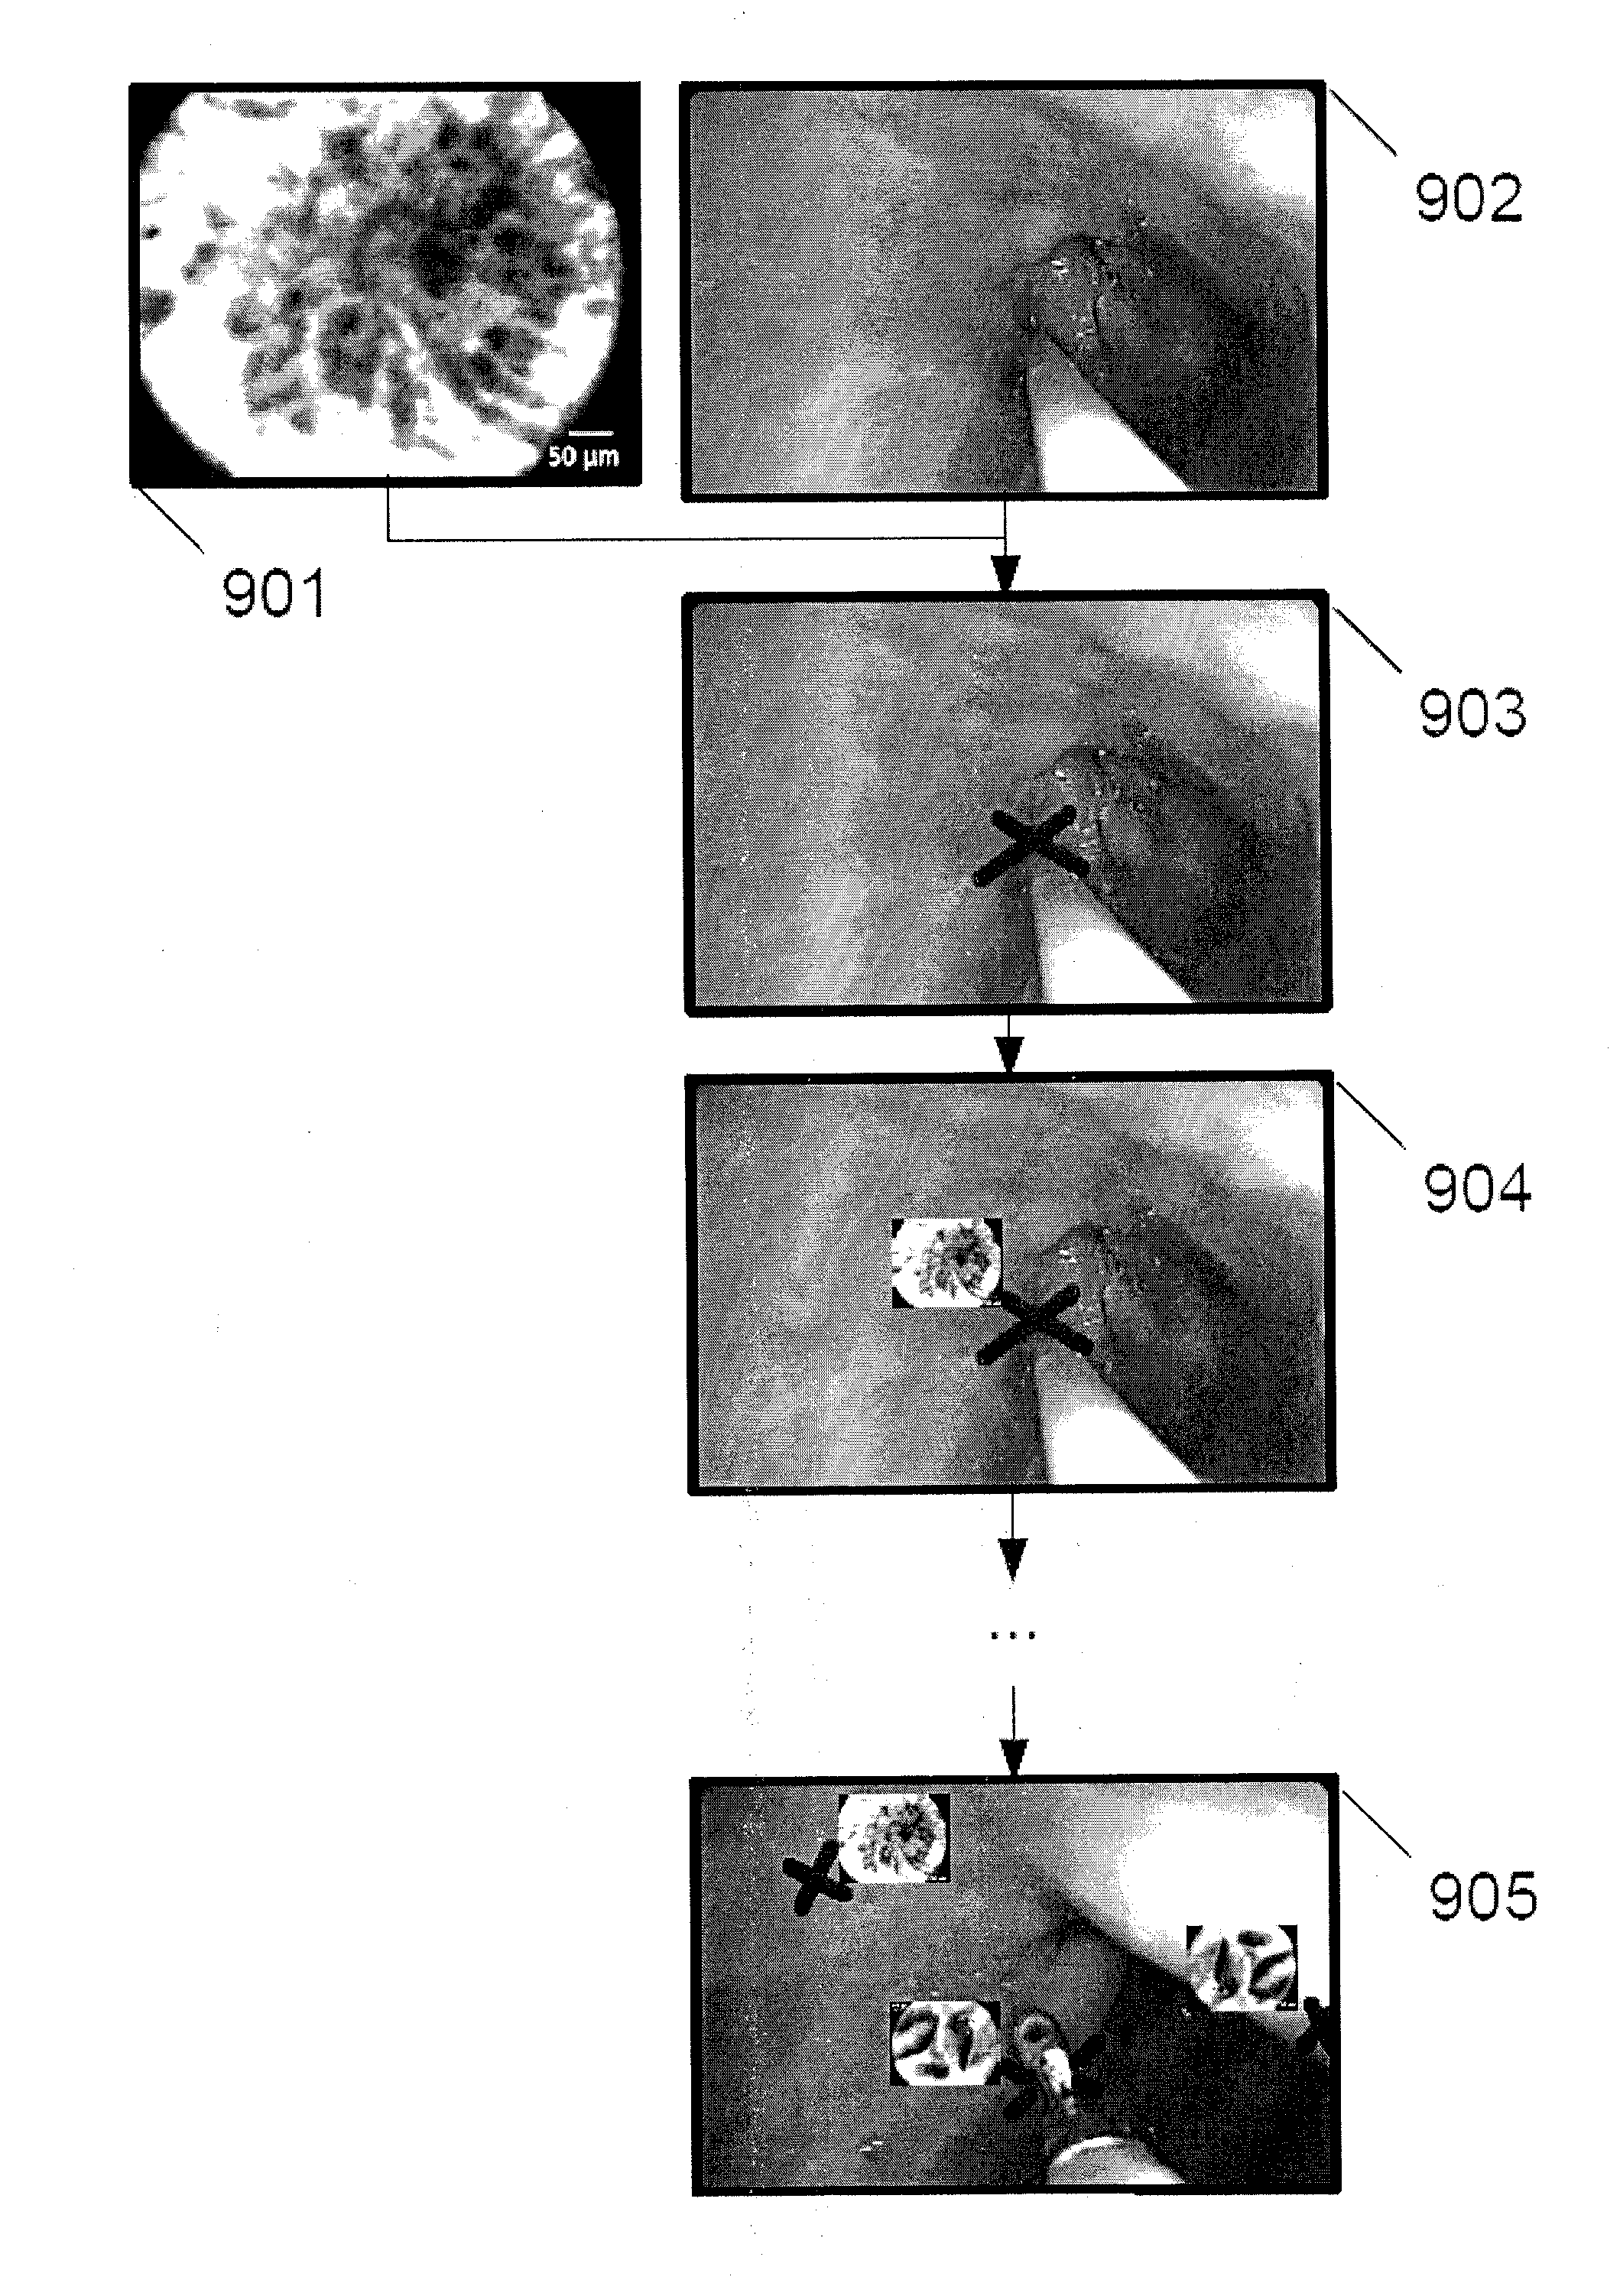 Method and system for processing images acquired in real time through a medical device